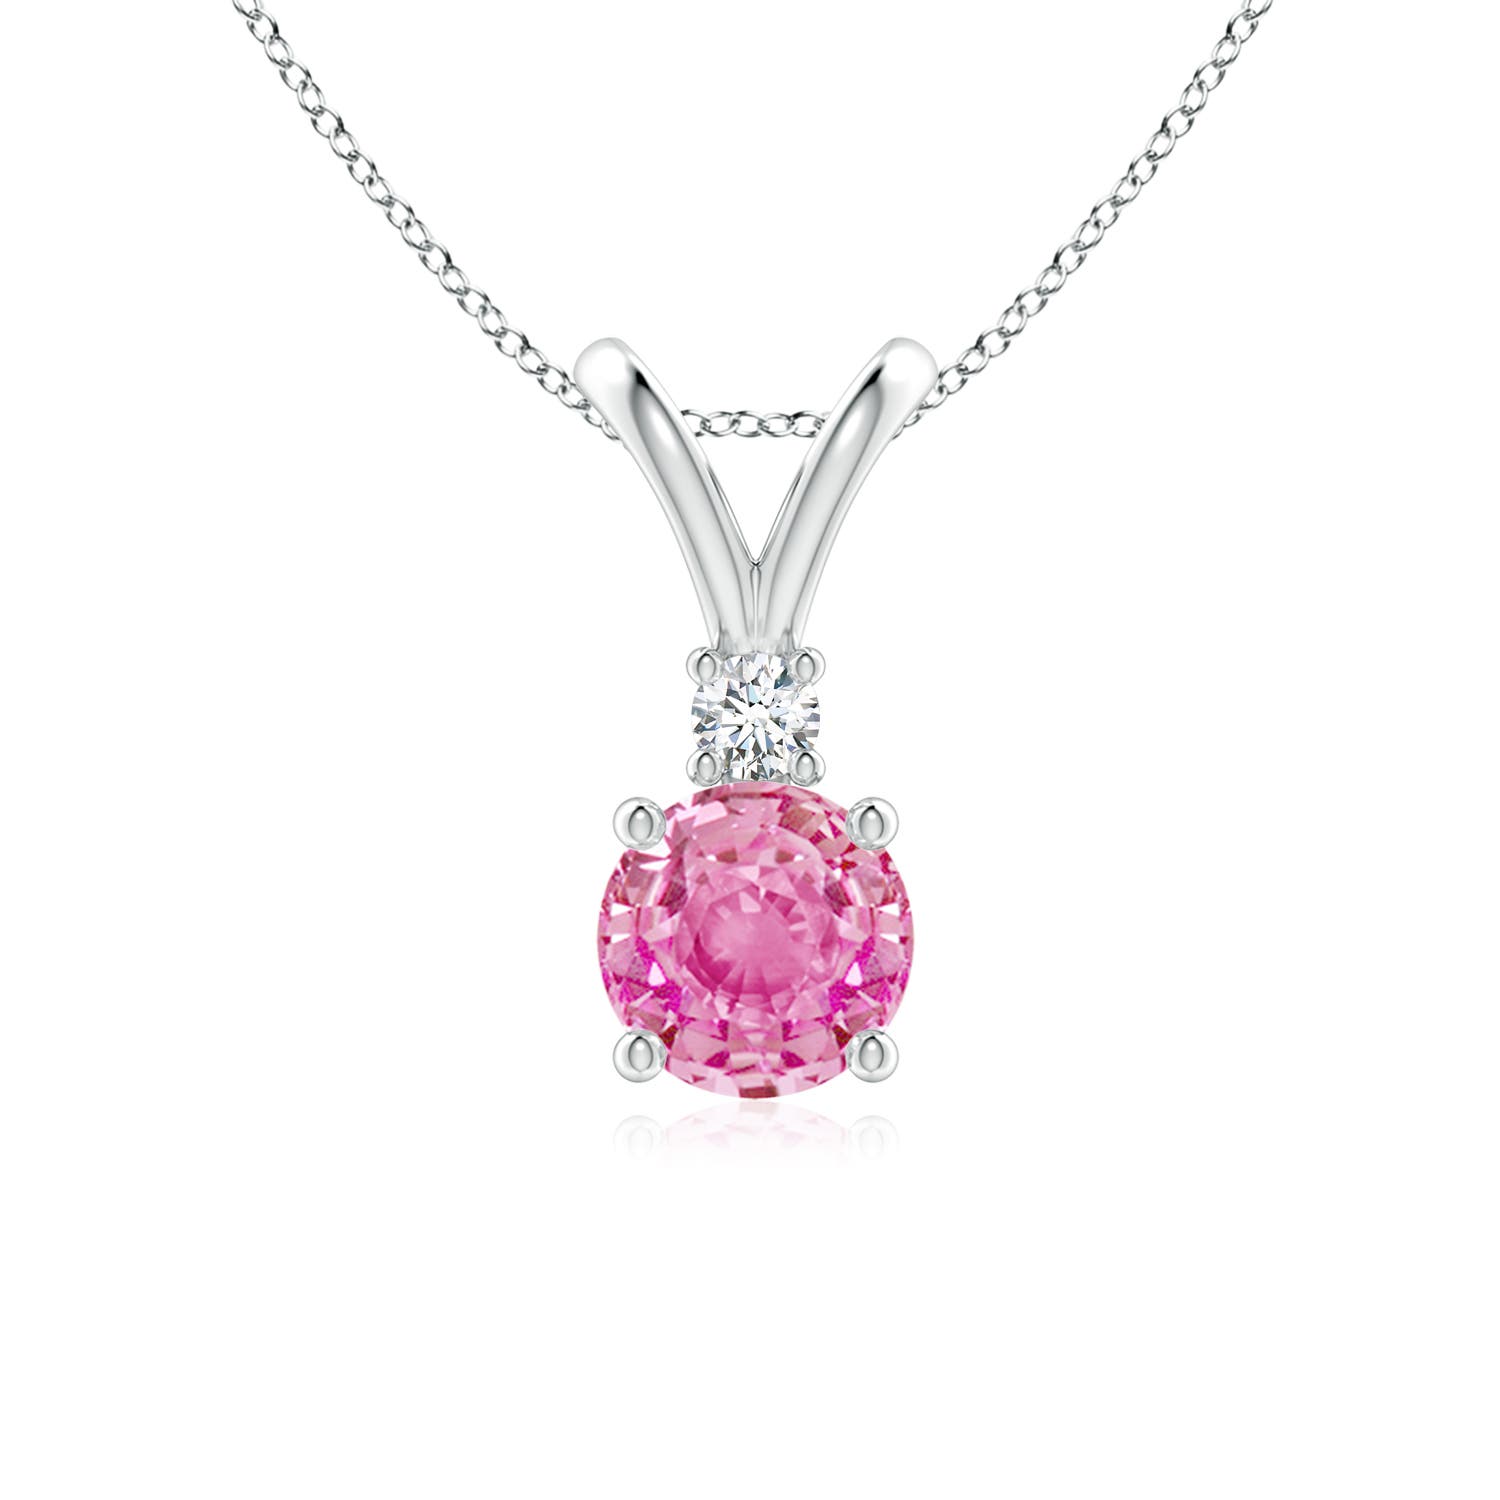 AA - Pink Sapphire / 1.04 CT / 14 KT White Gold